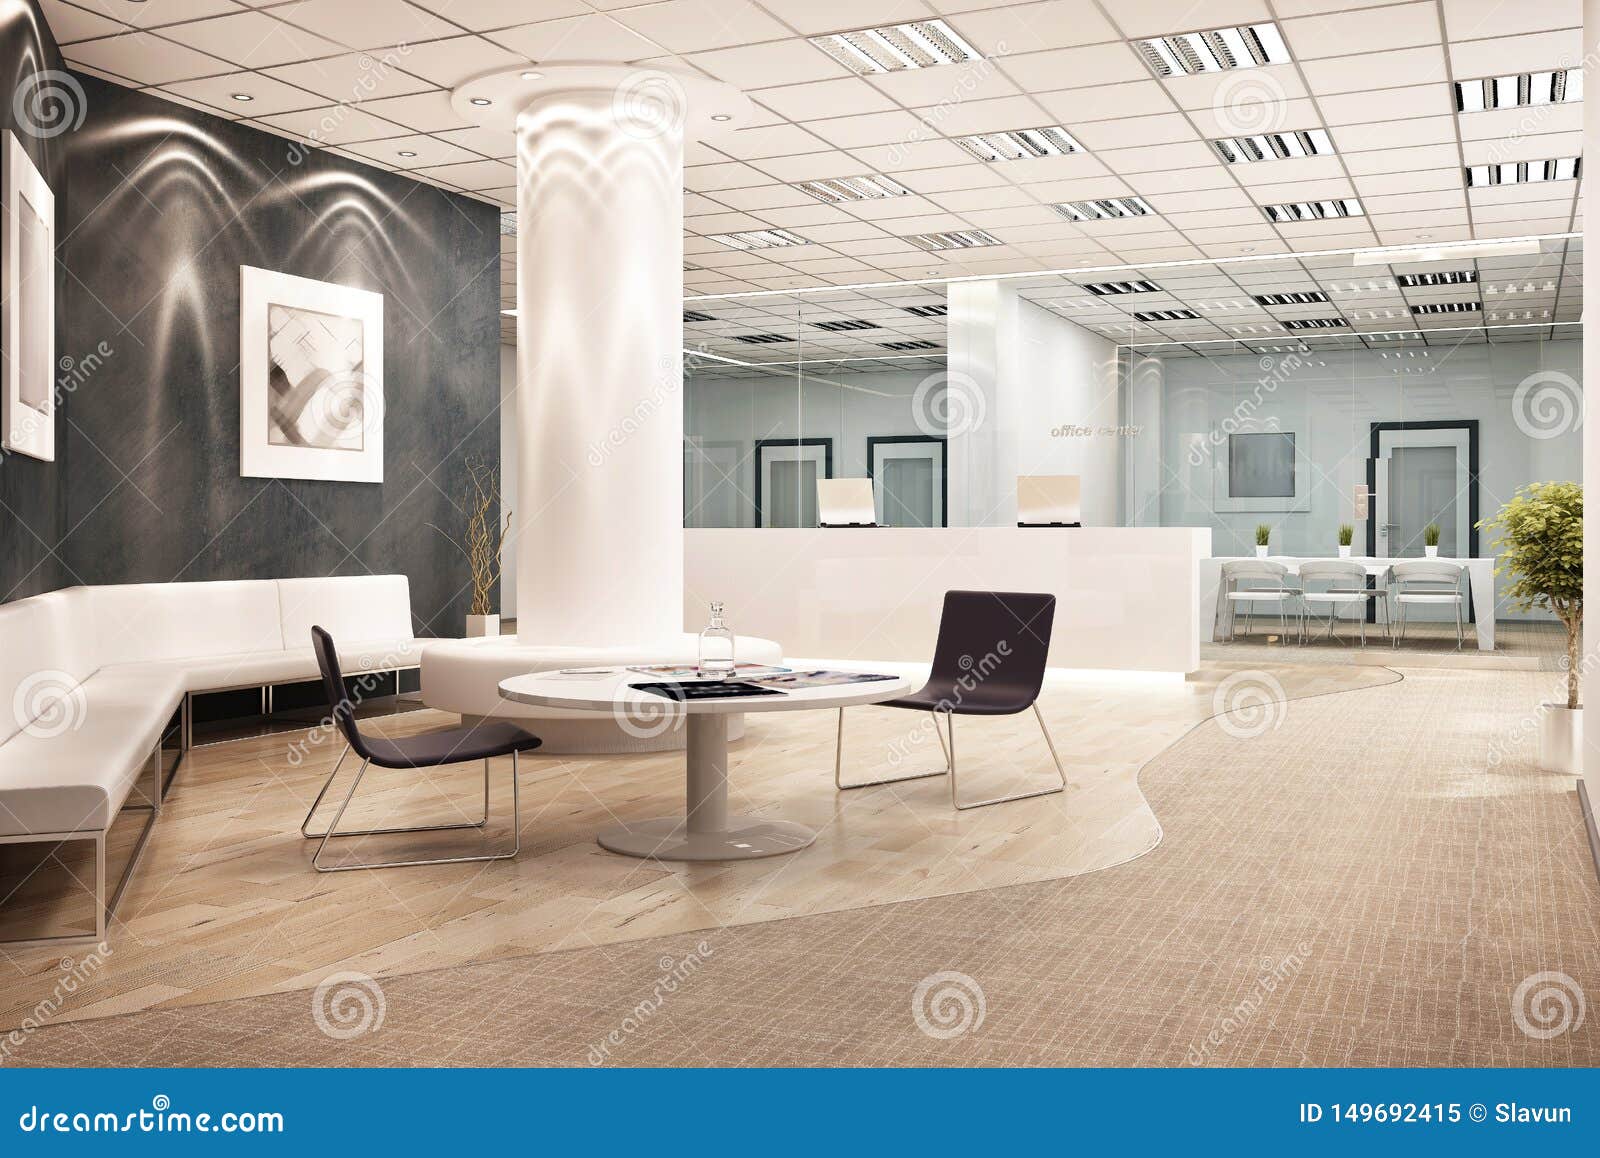 Modern Office Interior Design With Reception Editorial Image